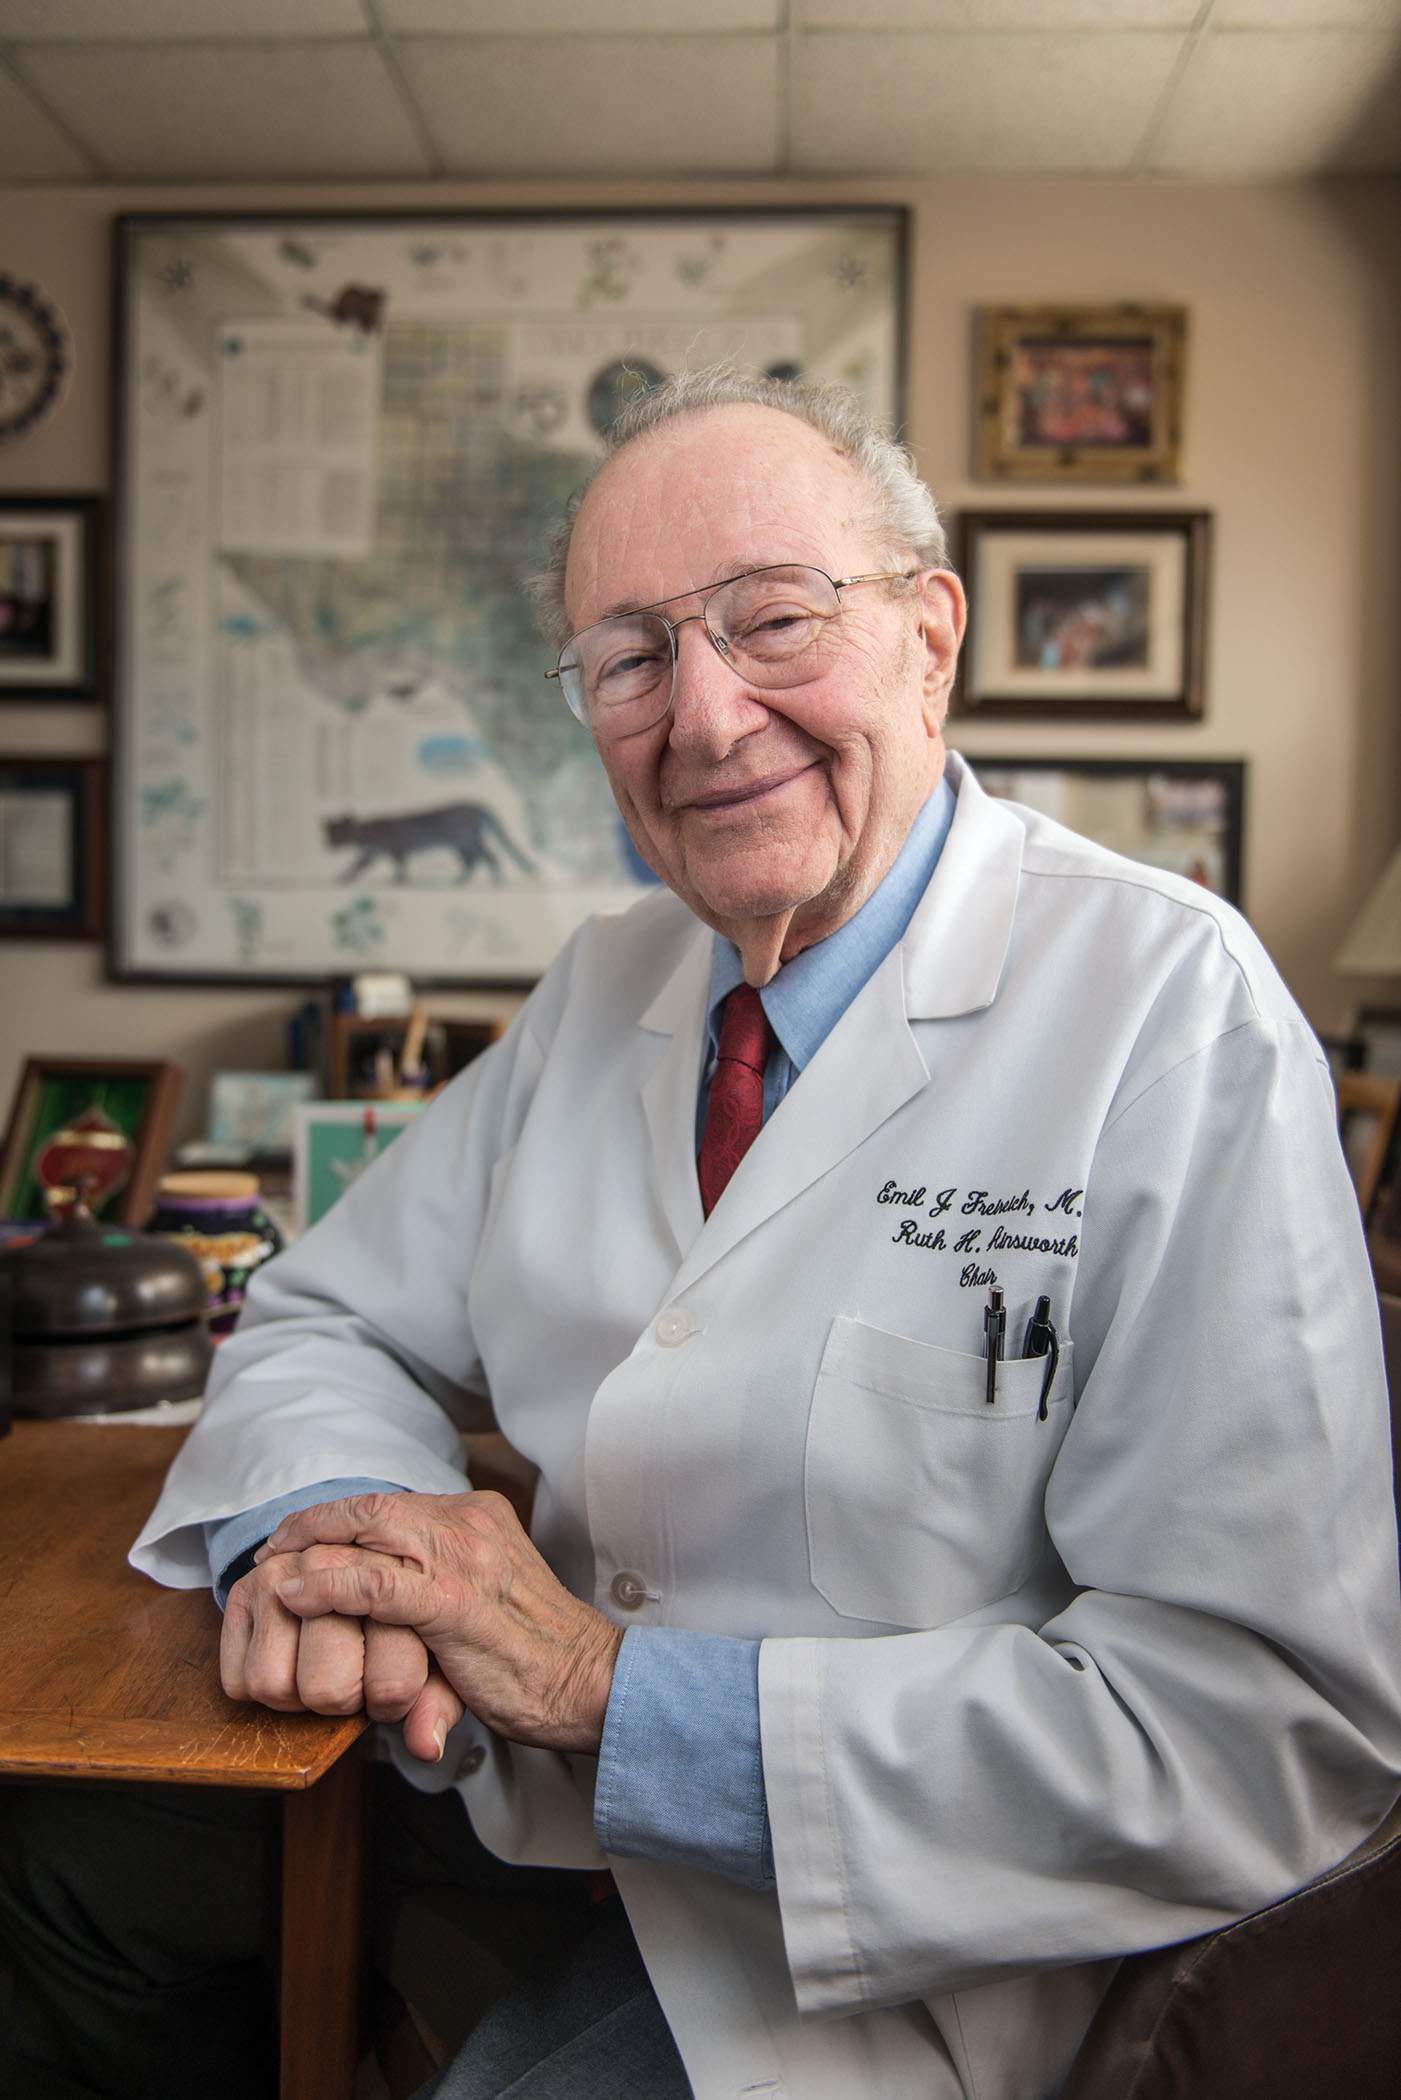 MD Anderson remembers Dr. Emil J Freireich